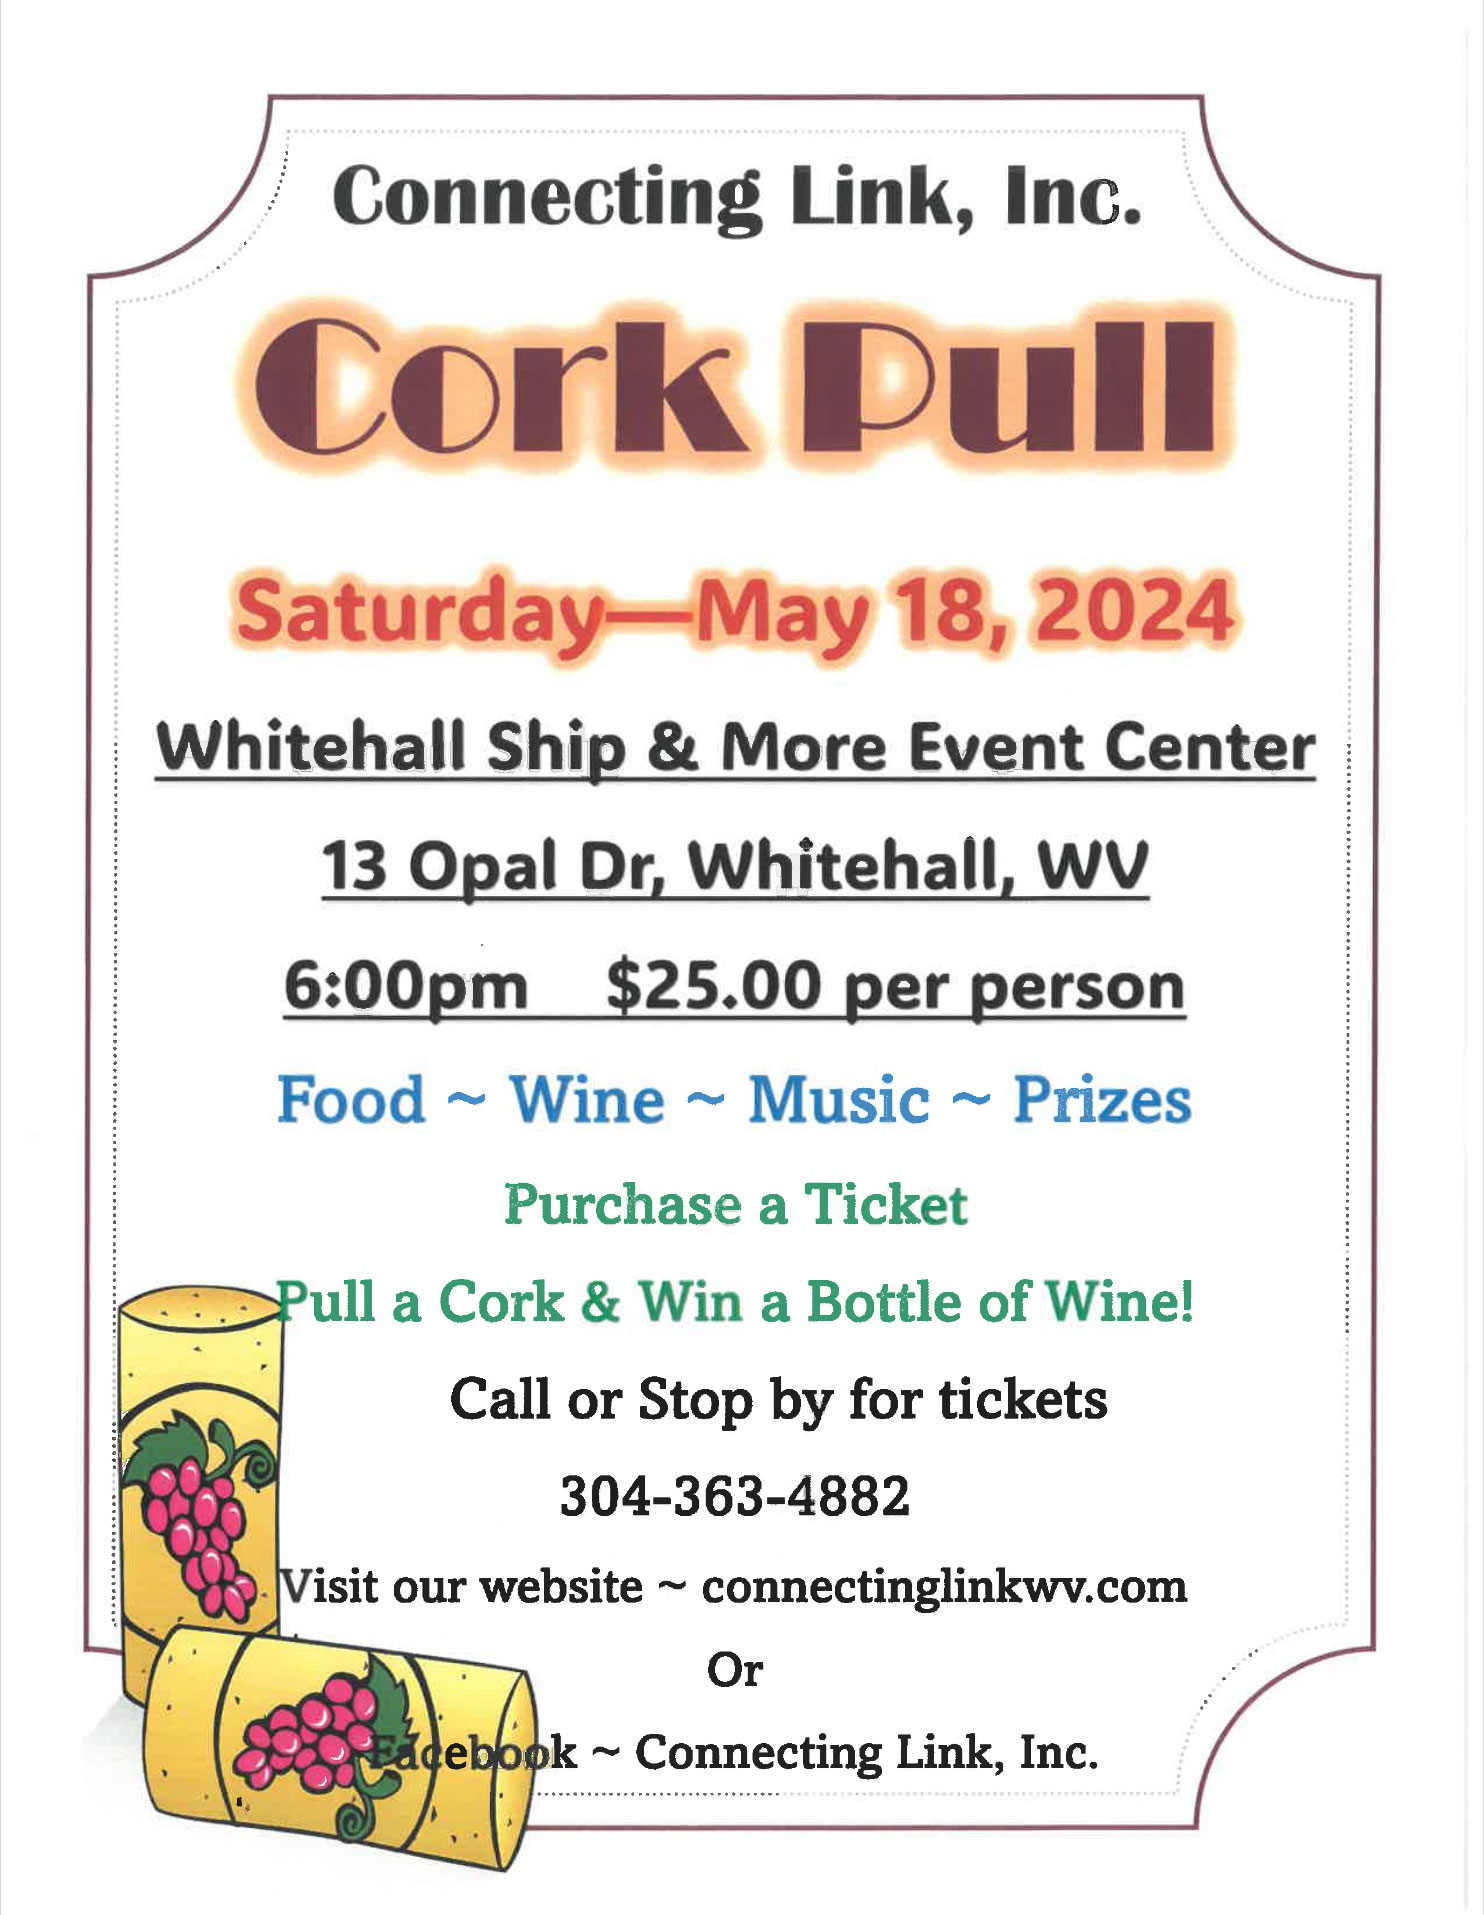 Connecting Link Cork Pull 2024